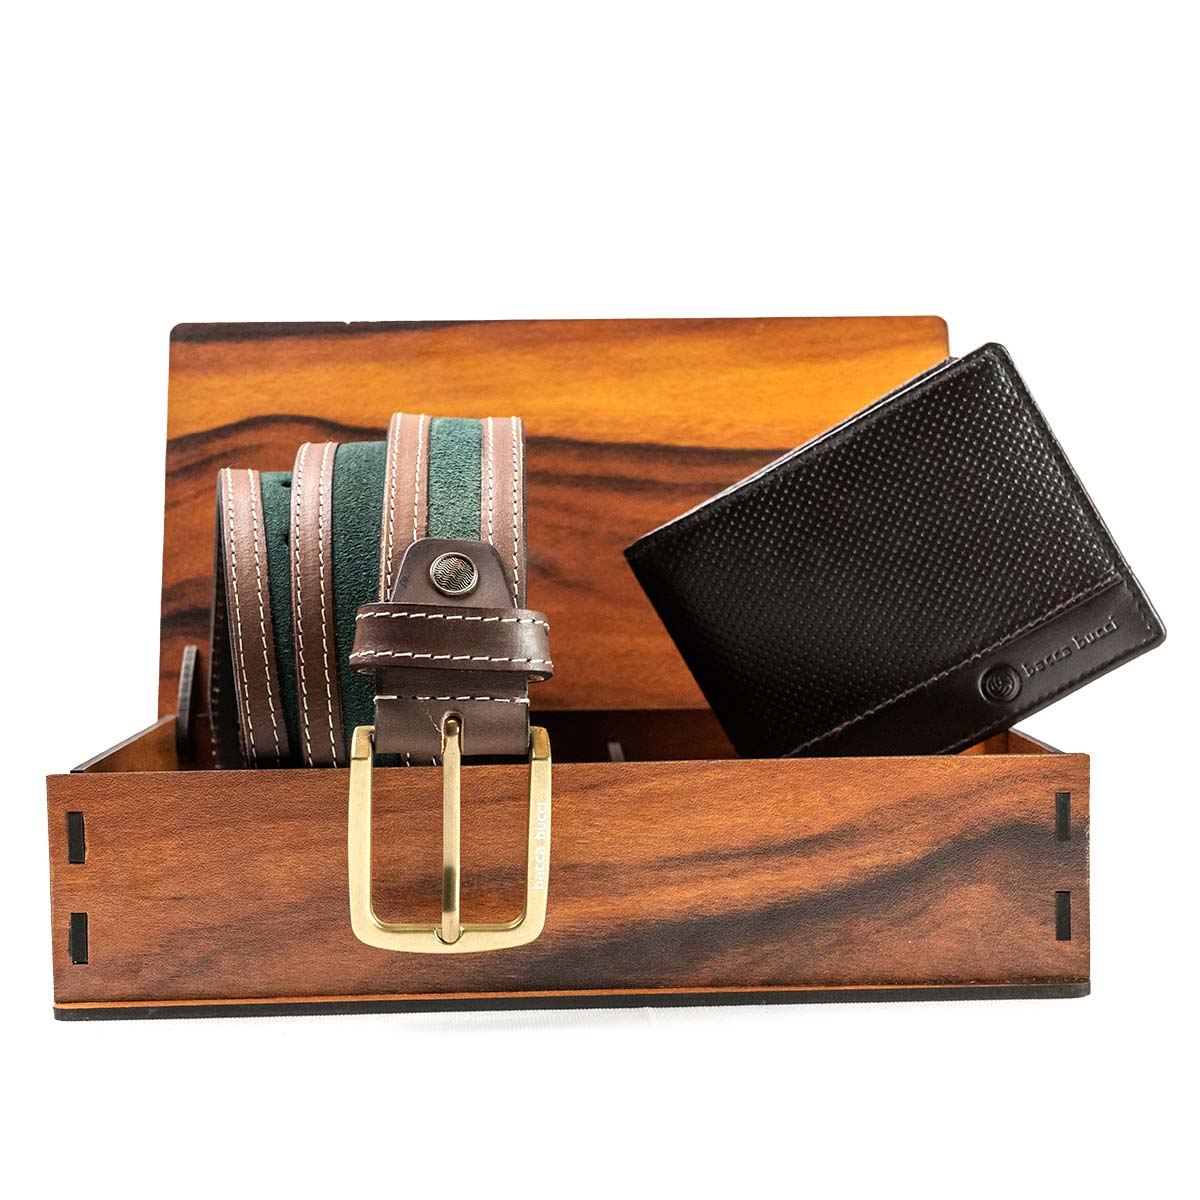 Men's Casual Jeans belt with Genuine grain leather & Genuine soft Leather Wallet combo Gift Set for Men